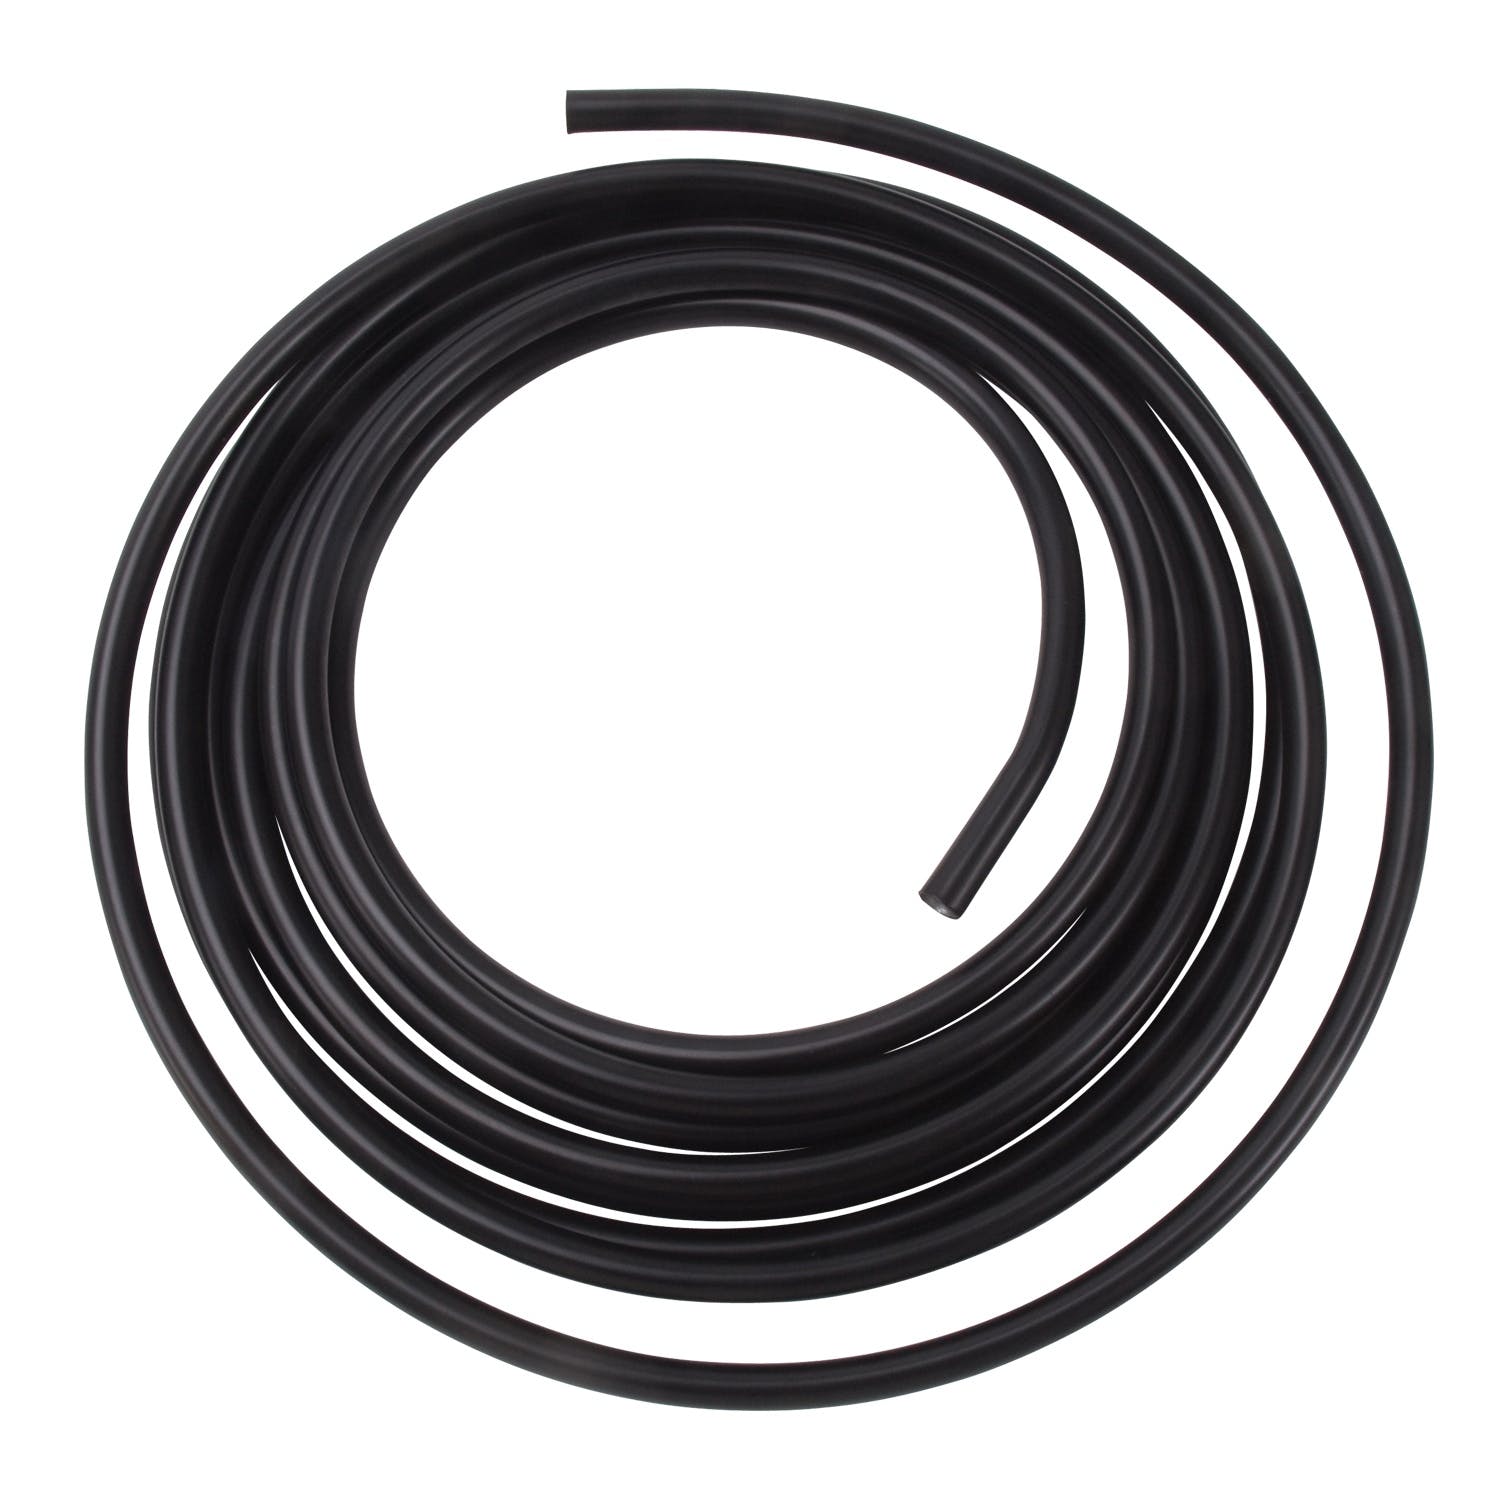 Russell 639273 Aluminum Fuel Line 1/2in OD Black